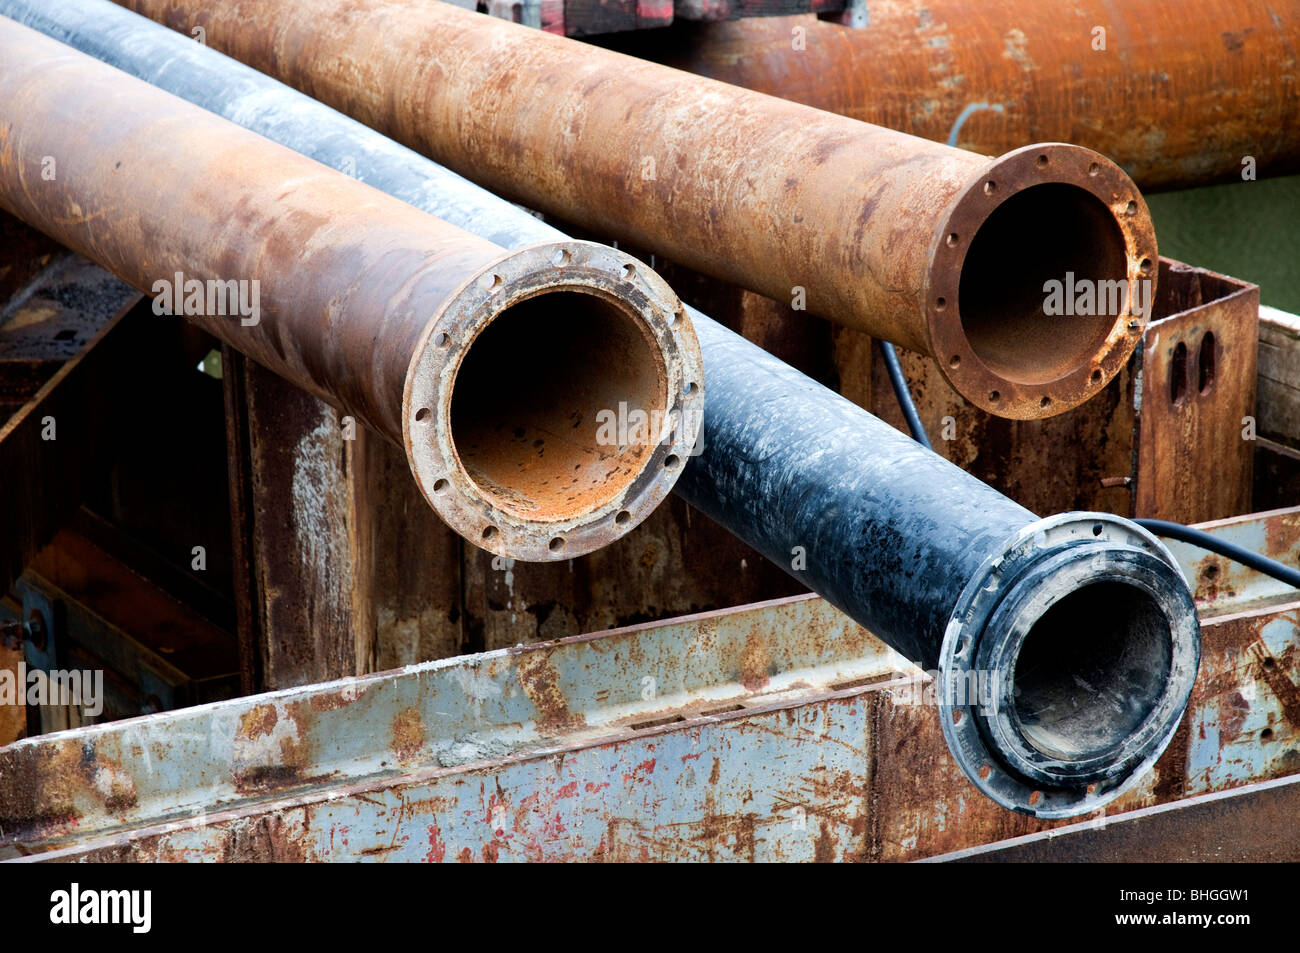 Close up shot of some metal pipes Stock Photo